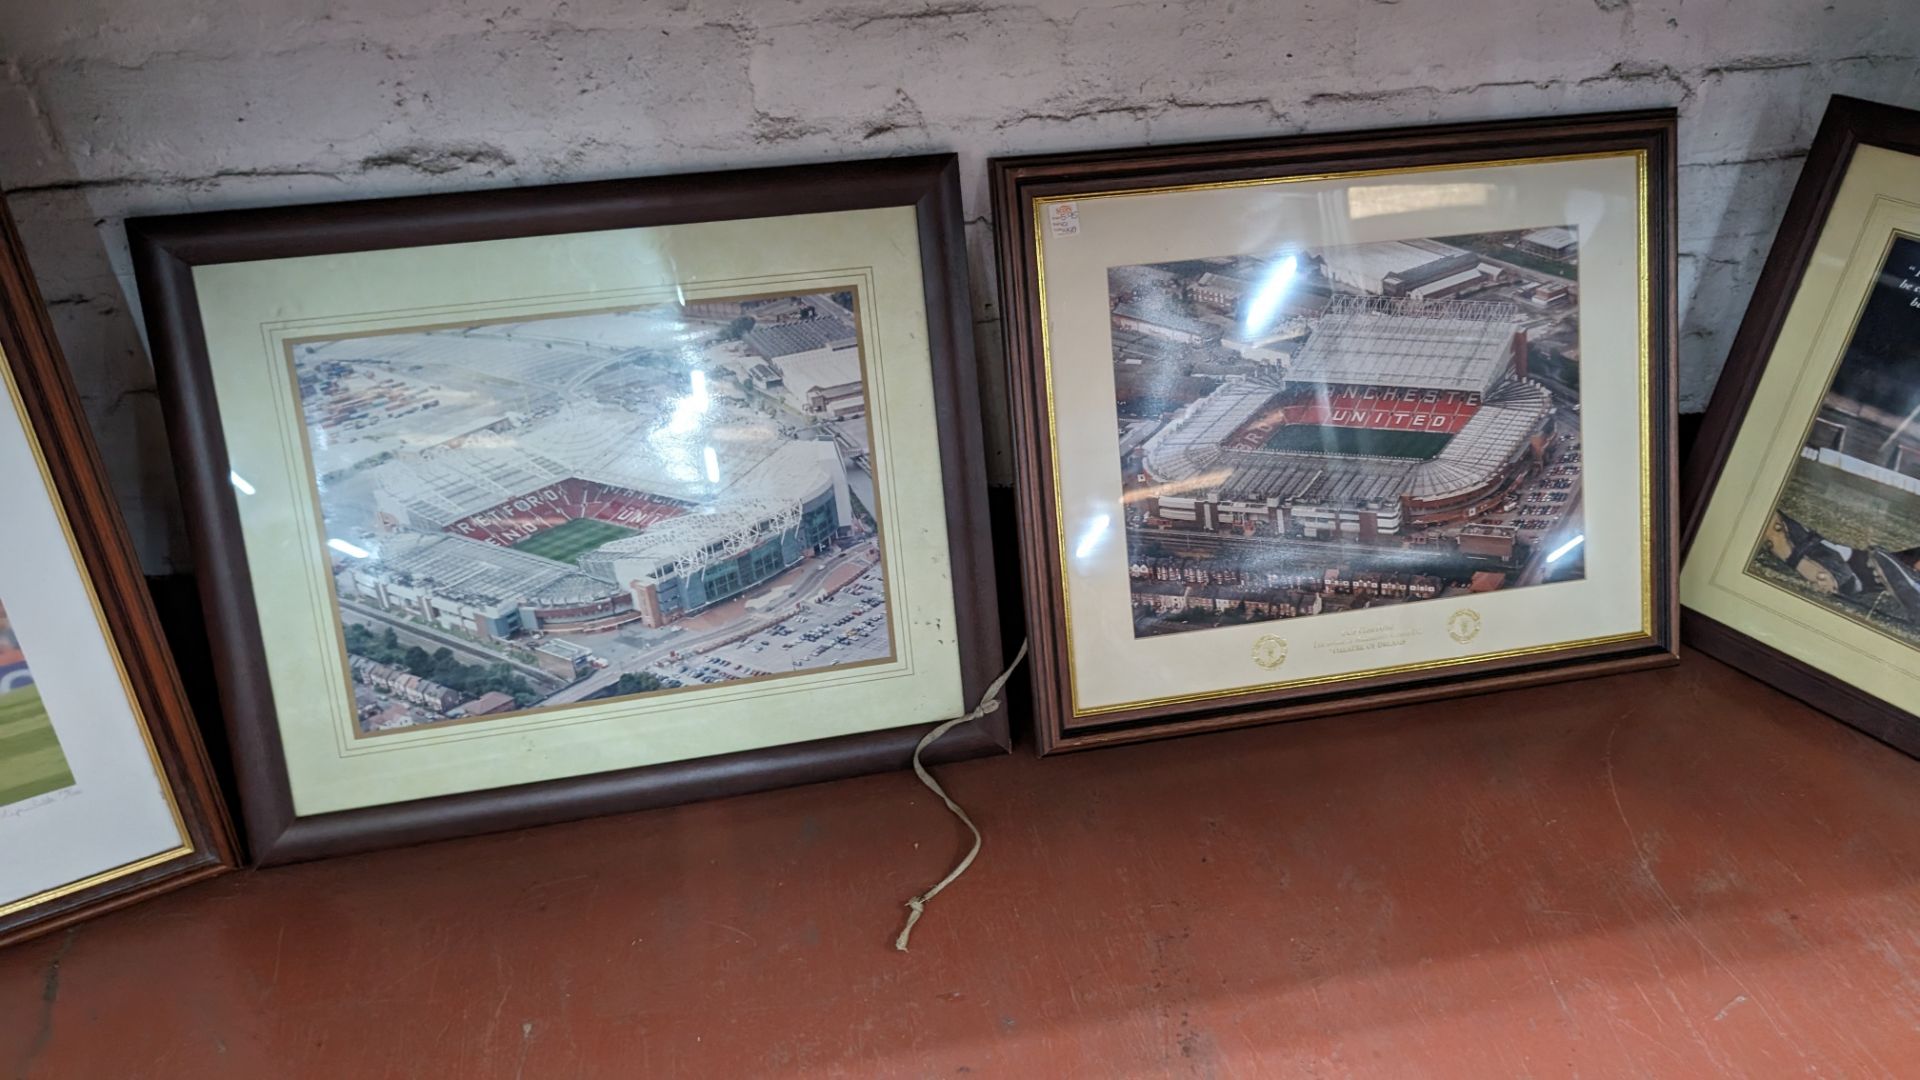 5 off football related framed photos, comprising 4 photographs relating to Manchester Utd & 1 relati - Image 9 of 11